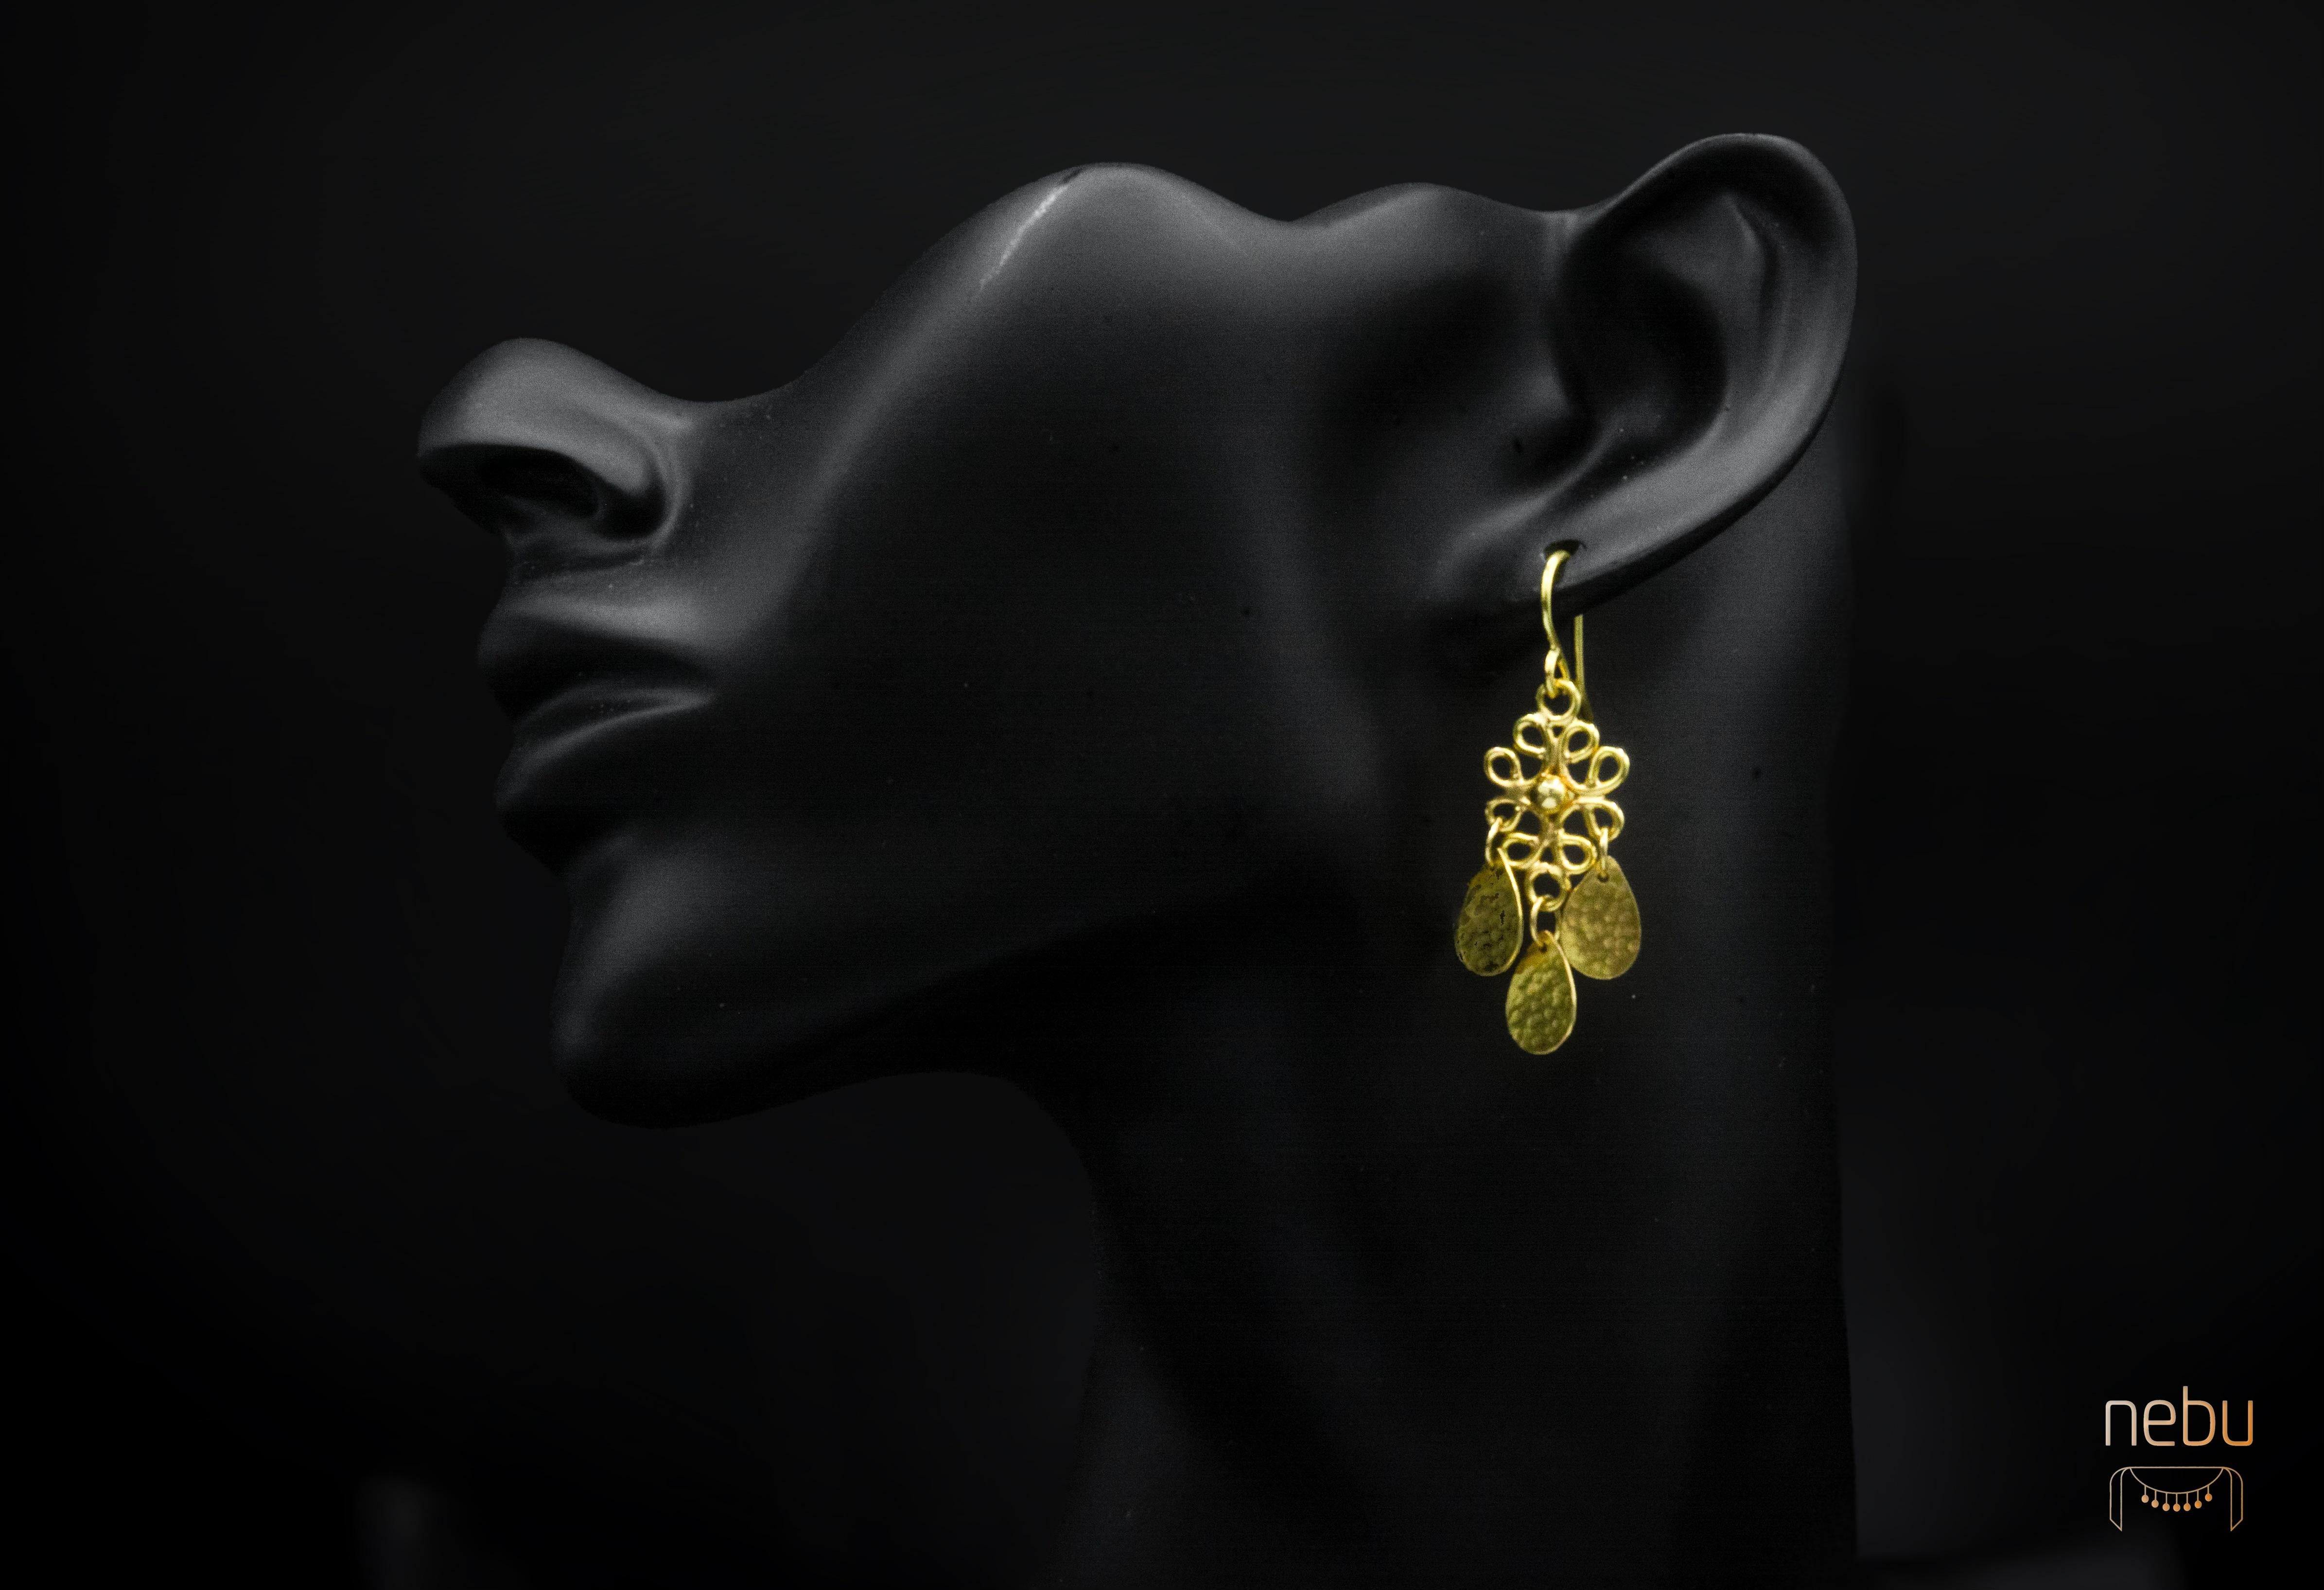 - Available 
-Handmade
- 18K Gold
- 4cm long
-Stamped with the Nebu logo 

Inspired by the intricate motifs found in traditional Indonesian jewelry, these earrings boast delicate open filigree work that exudes elegance and sophistication. Crafted